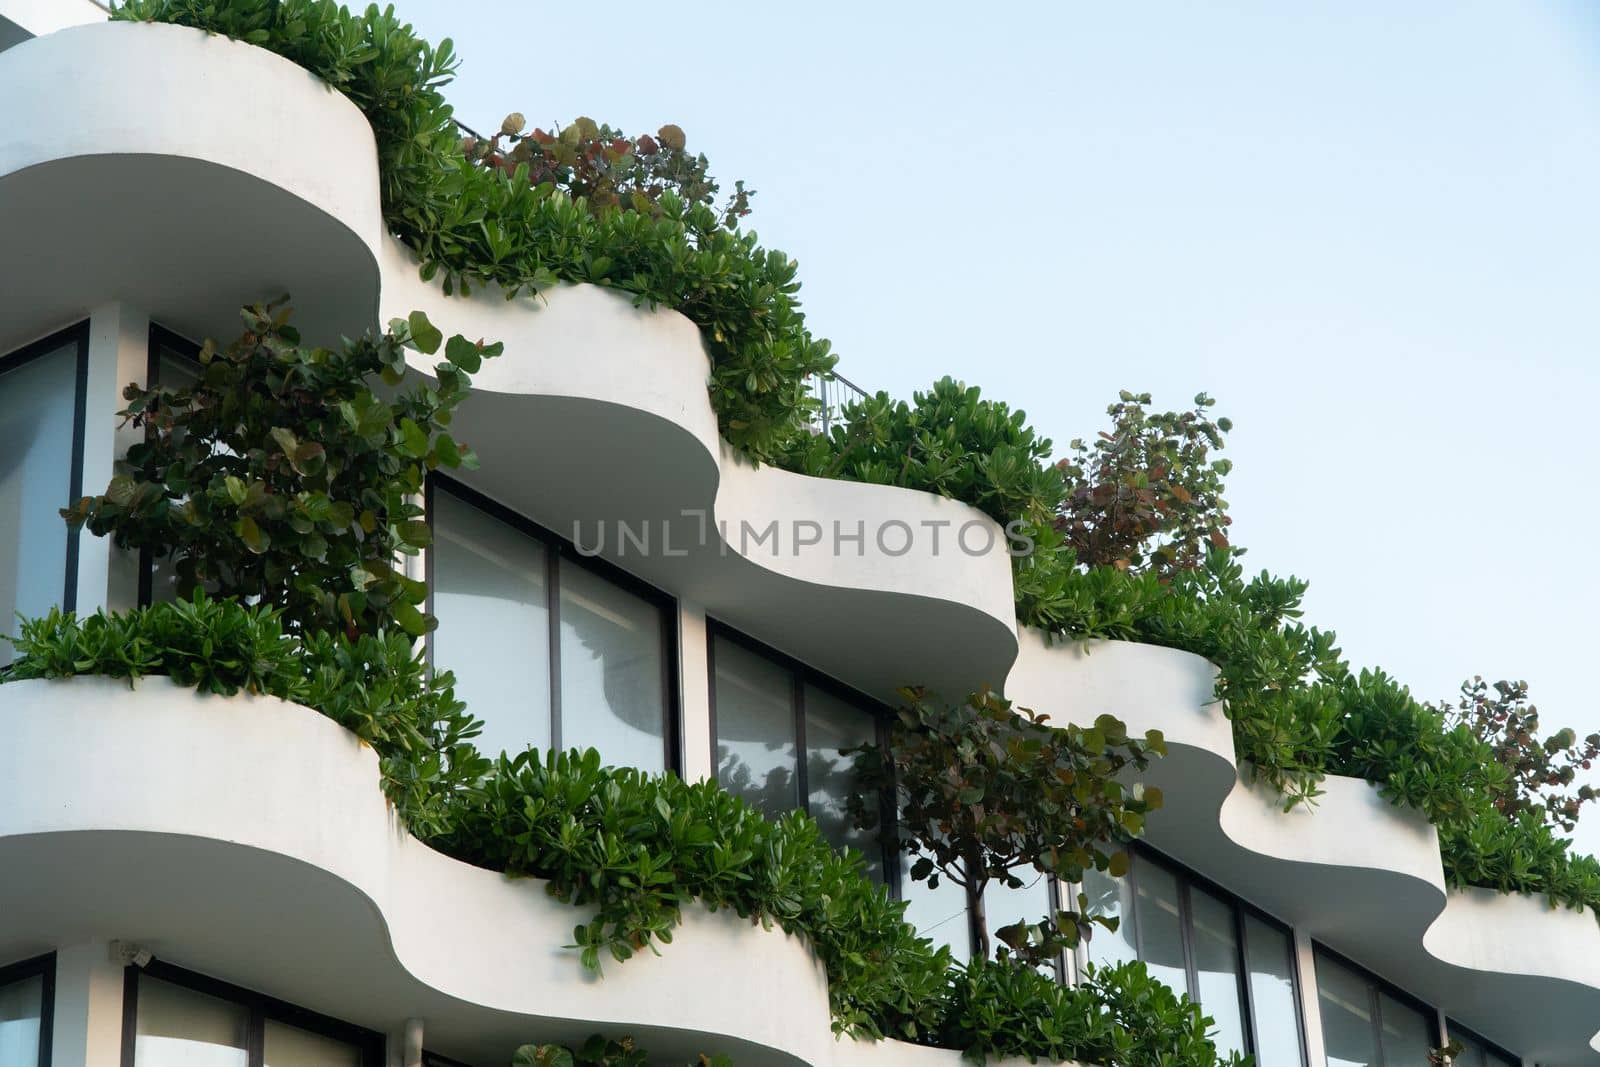 Plants and trees on the balcony of the building, landscaping and gardening by voktybre